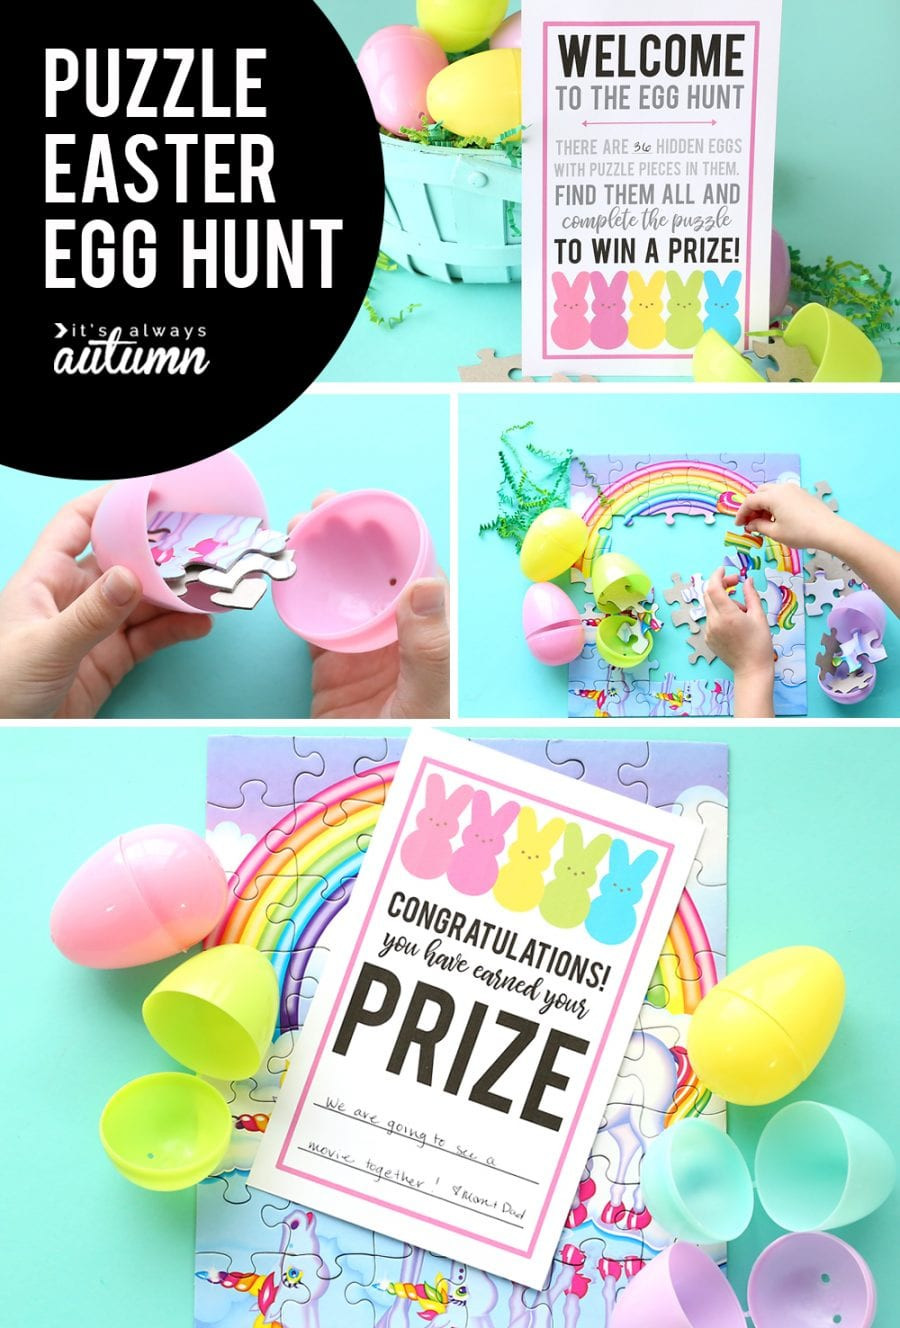 Fun Easter Egg Hunt Ideas
 Easter Egg hunt ideas that your kids will love to play